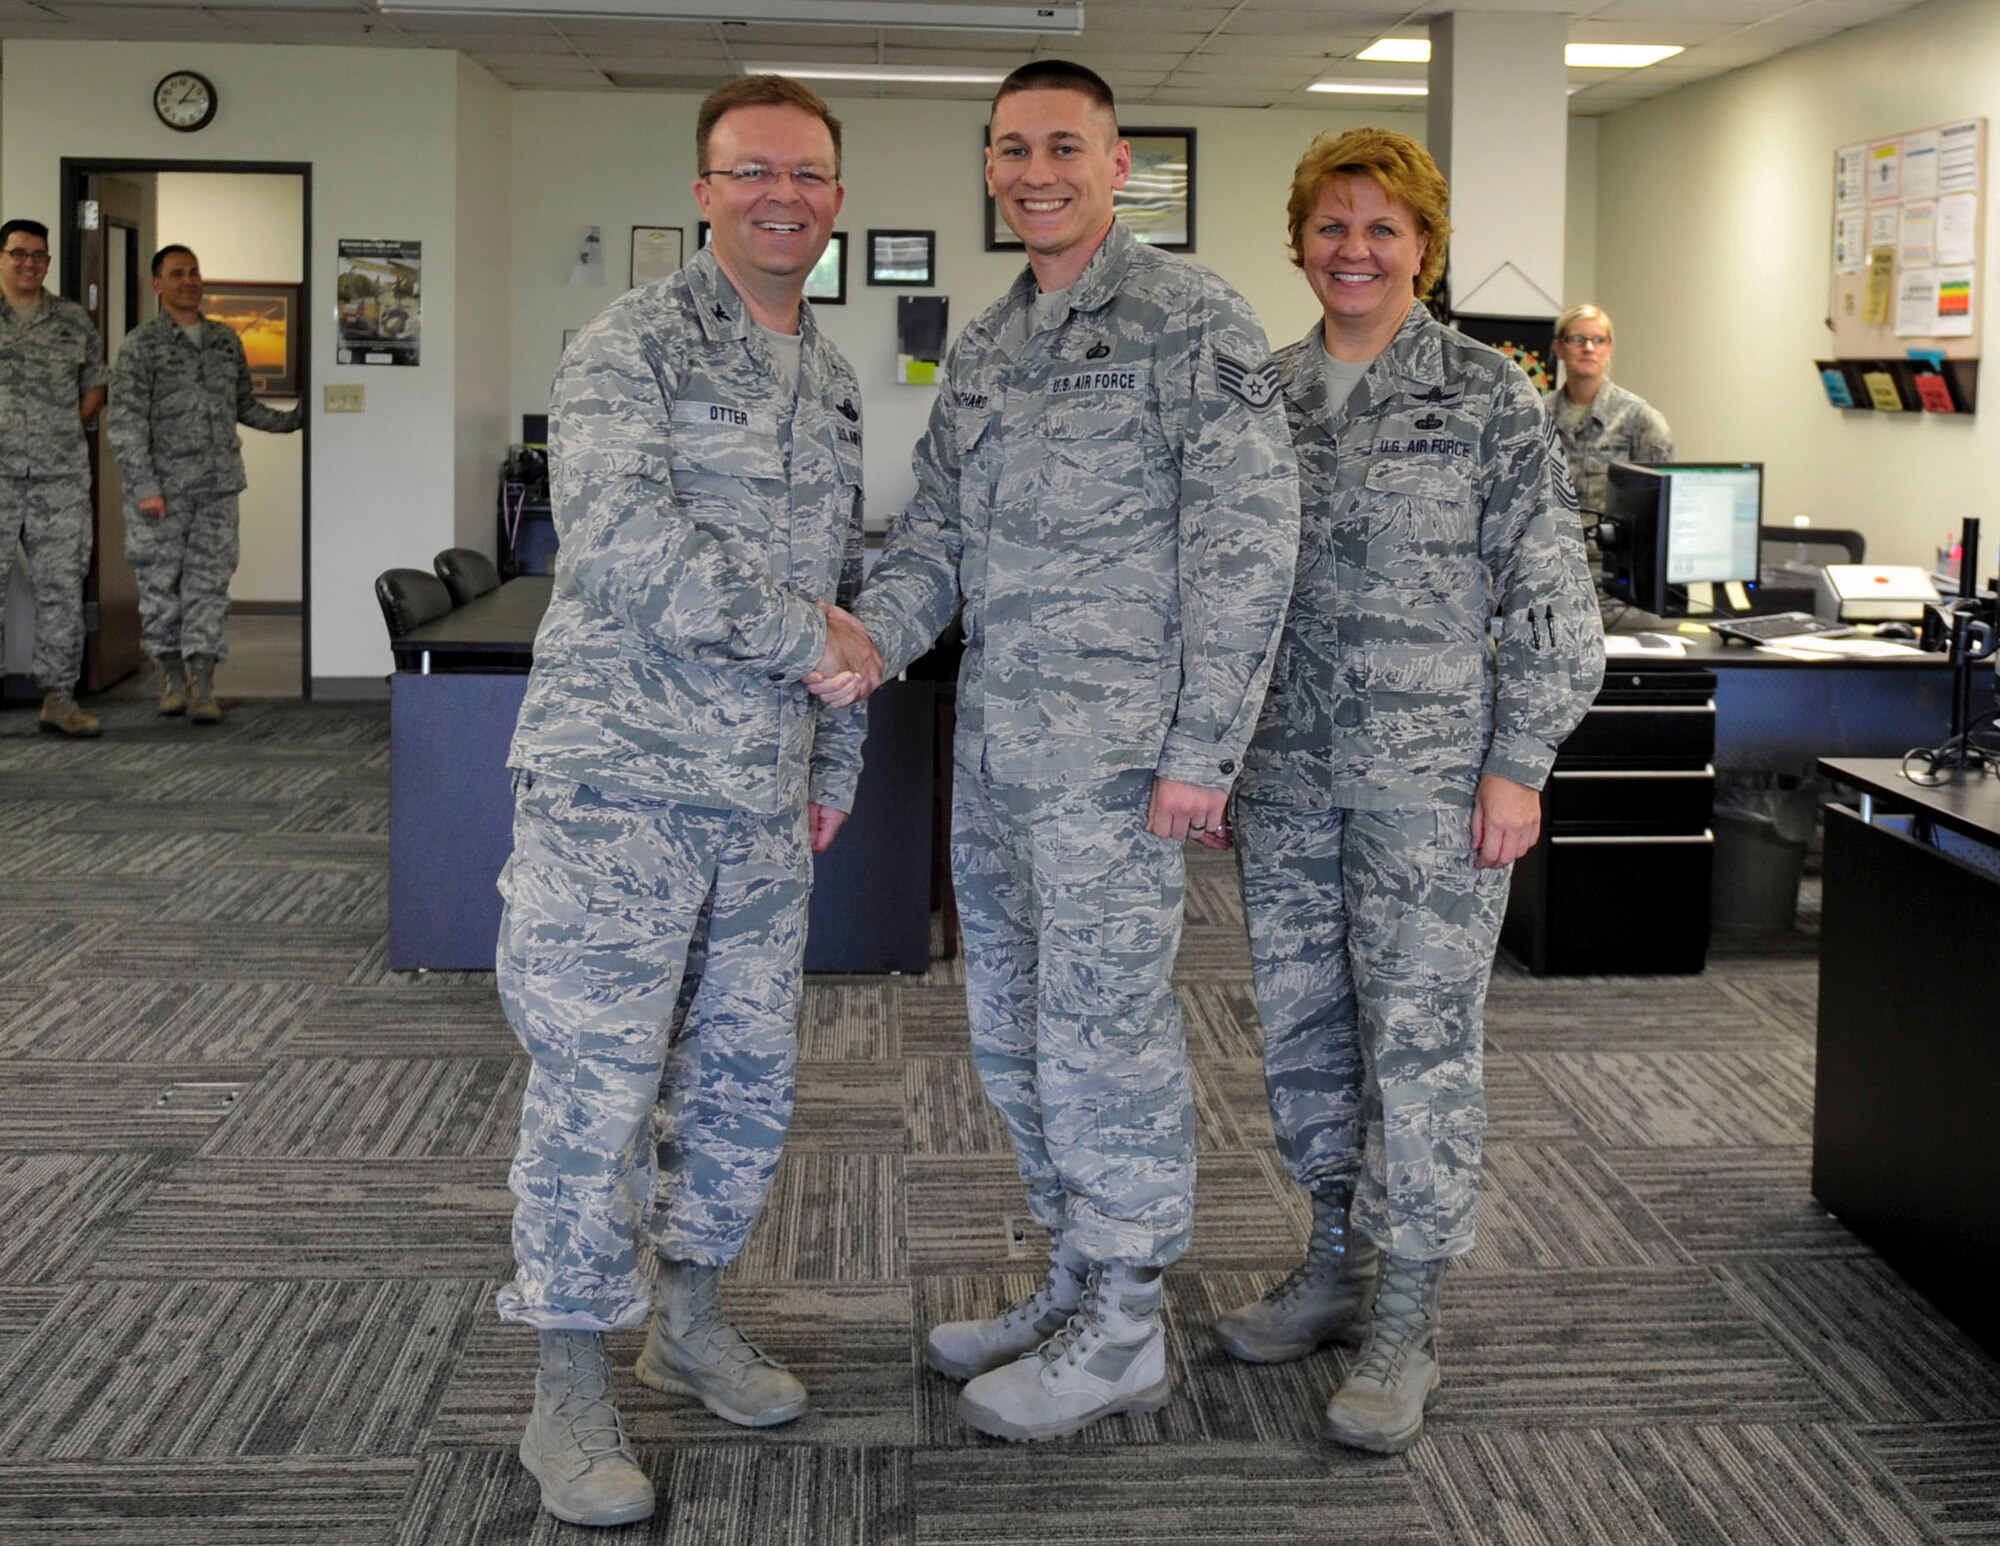 Col. Bill Otter, 19th Airlift Wing vice commander, along with Chief Master Sgt. Rhonda Buening, 19th Airlift Wing command chief, congratulate Staff Sgt. Gary Richard III, a 19th Comptroller Squadron noncommissioned officer in charge budget analyst, for his selection as Combat Airlifter of the Week May 26, 2015, at Little Rock Air Force Base, Ark. Initiated peer to peer training of three Wings in Air Combat Command, Air Mobility Command, and Air Force Global Strike Command on implementation of new Defense Enterprise Accounting Management System which allowed for the transition of over $425 million. (U.S. Air Force photo by Senior Airman Stephanie Serrano)